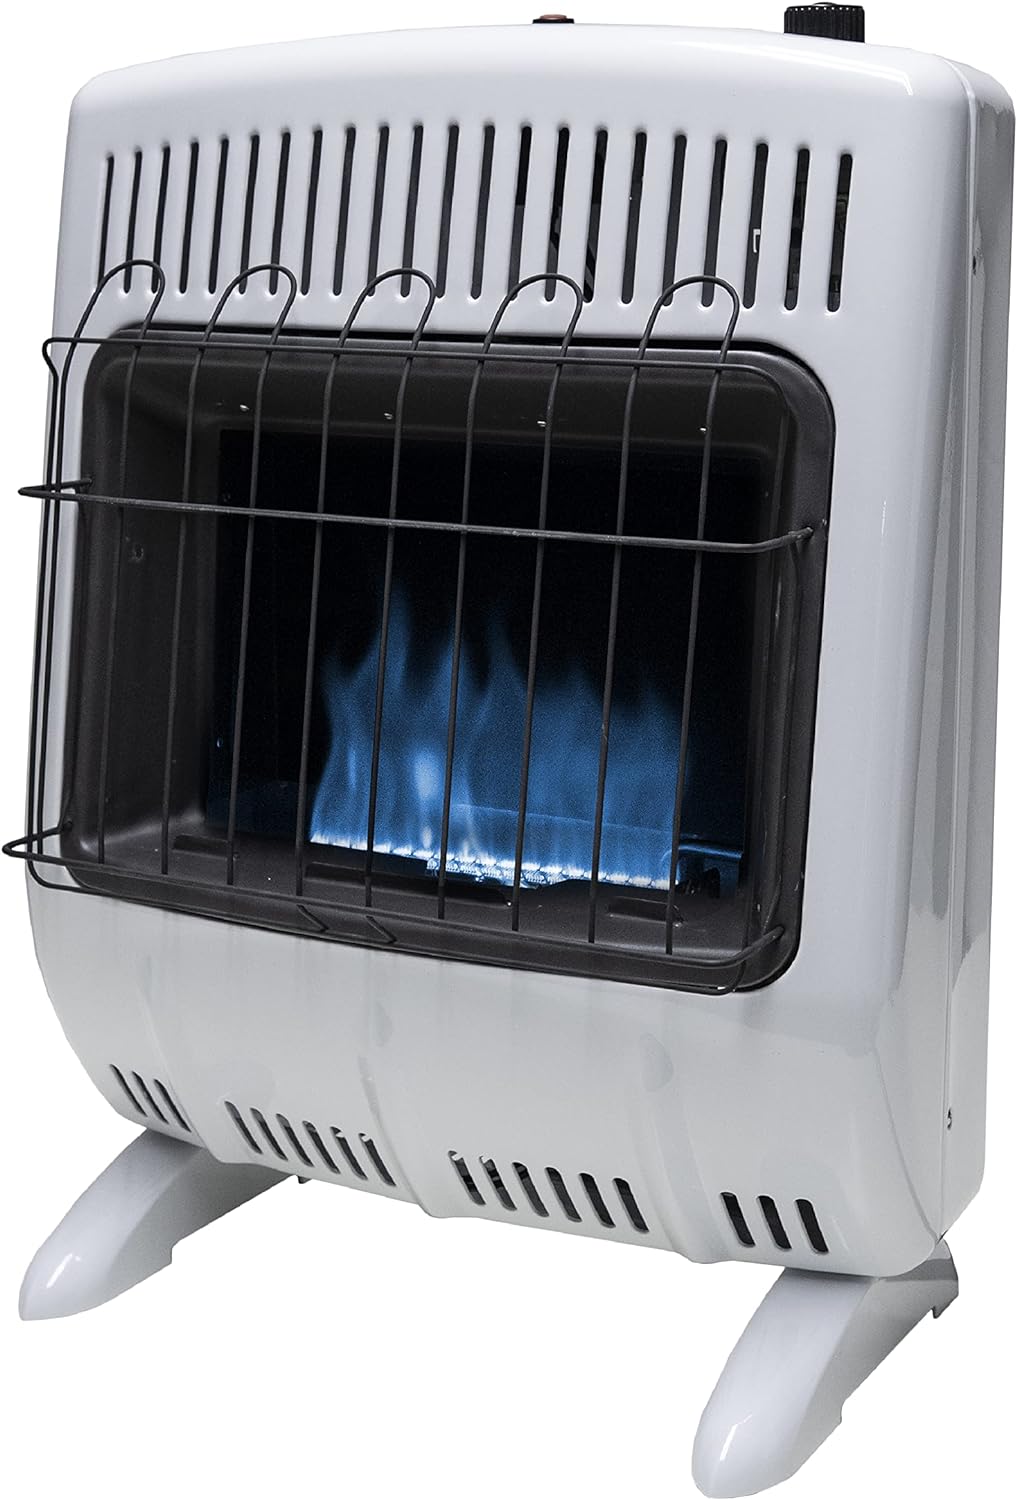 Mr. Heater Vent Free Propane Heater Review